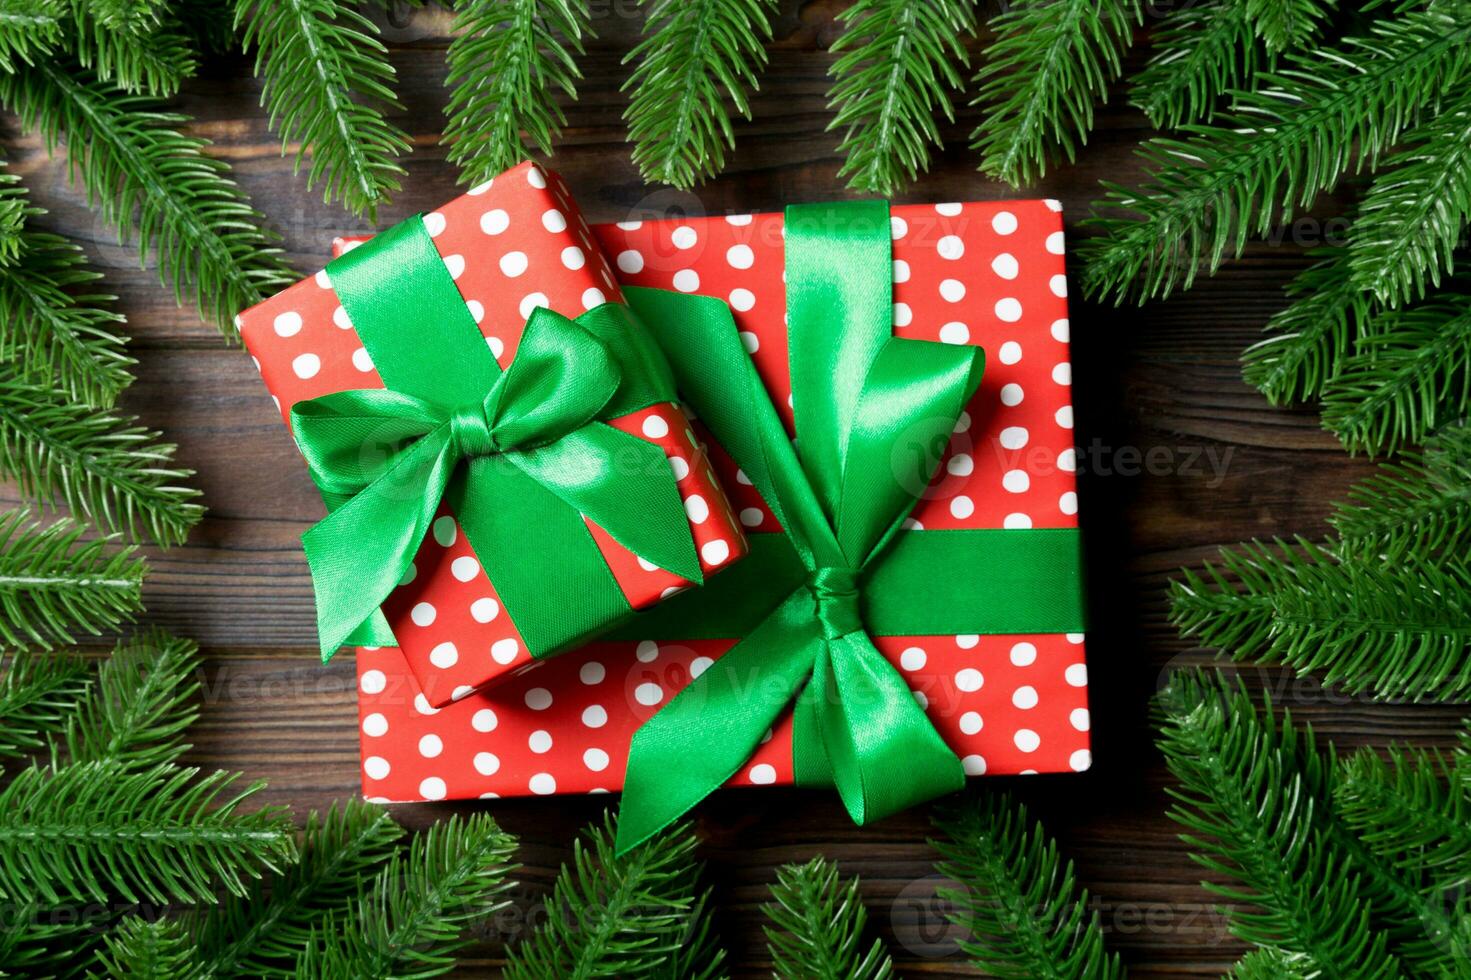 Top view of gifts box decorated with a frame made of fir tree on wooden background. New Year present time concept photo